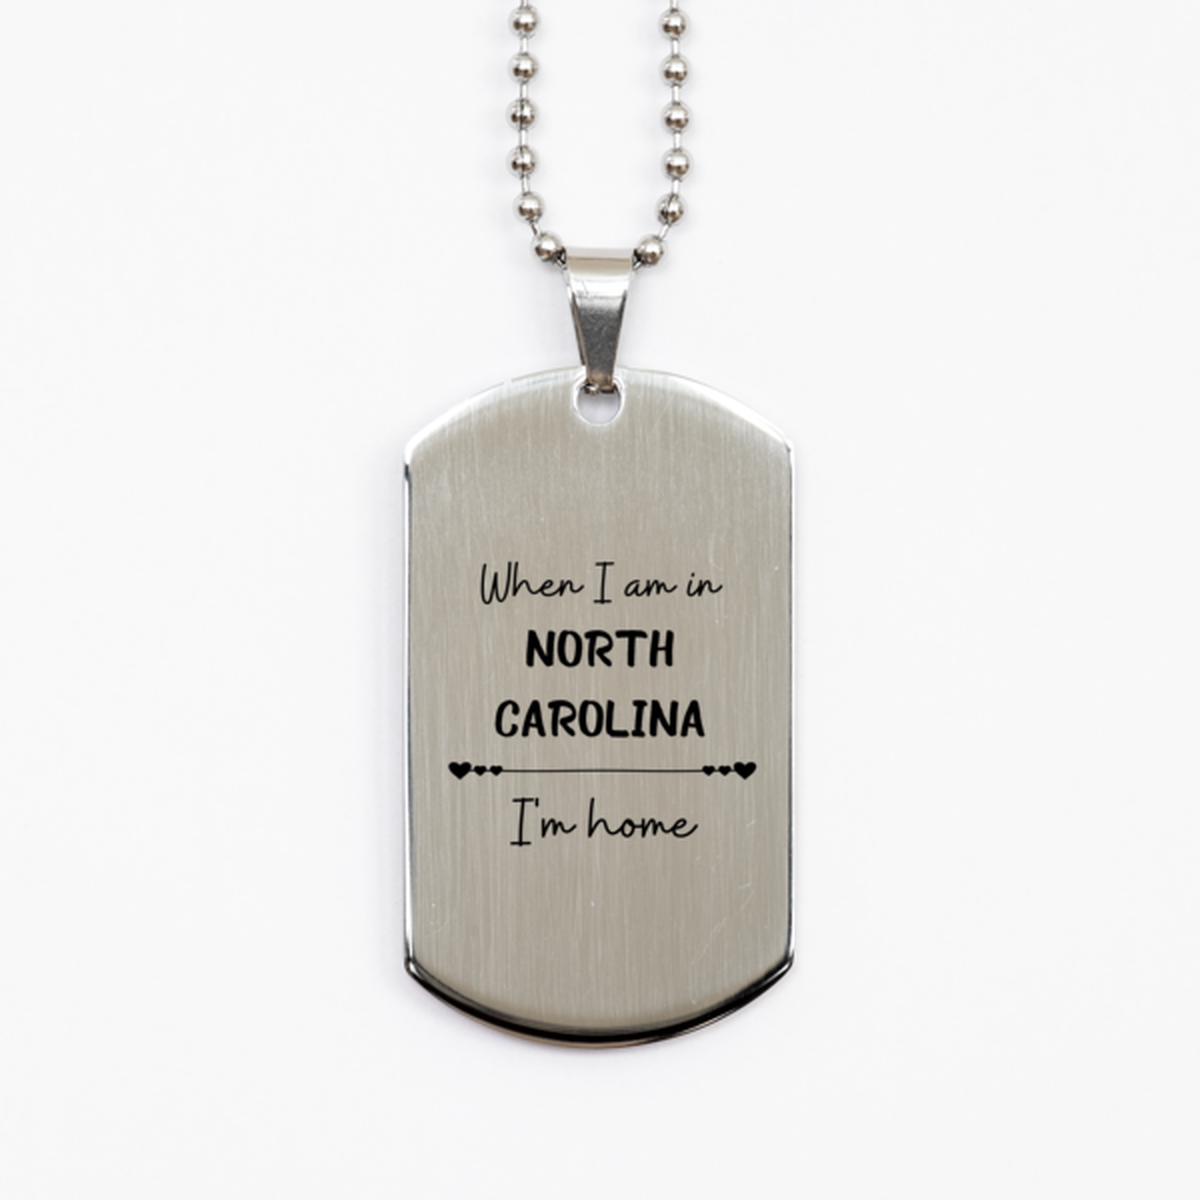 When I am in North Carolina I'm home Silver Dog Tag, Cheap Gifts For North Carolina, State North Carolina Birthday Gifts for Friends Coworker